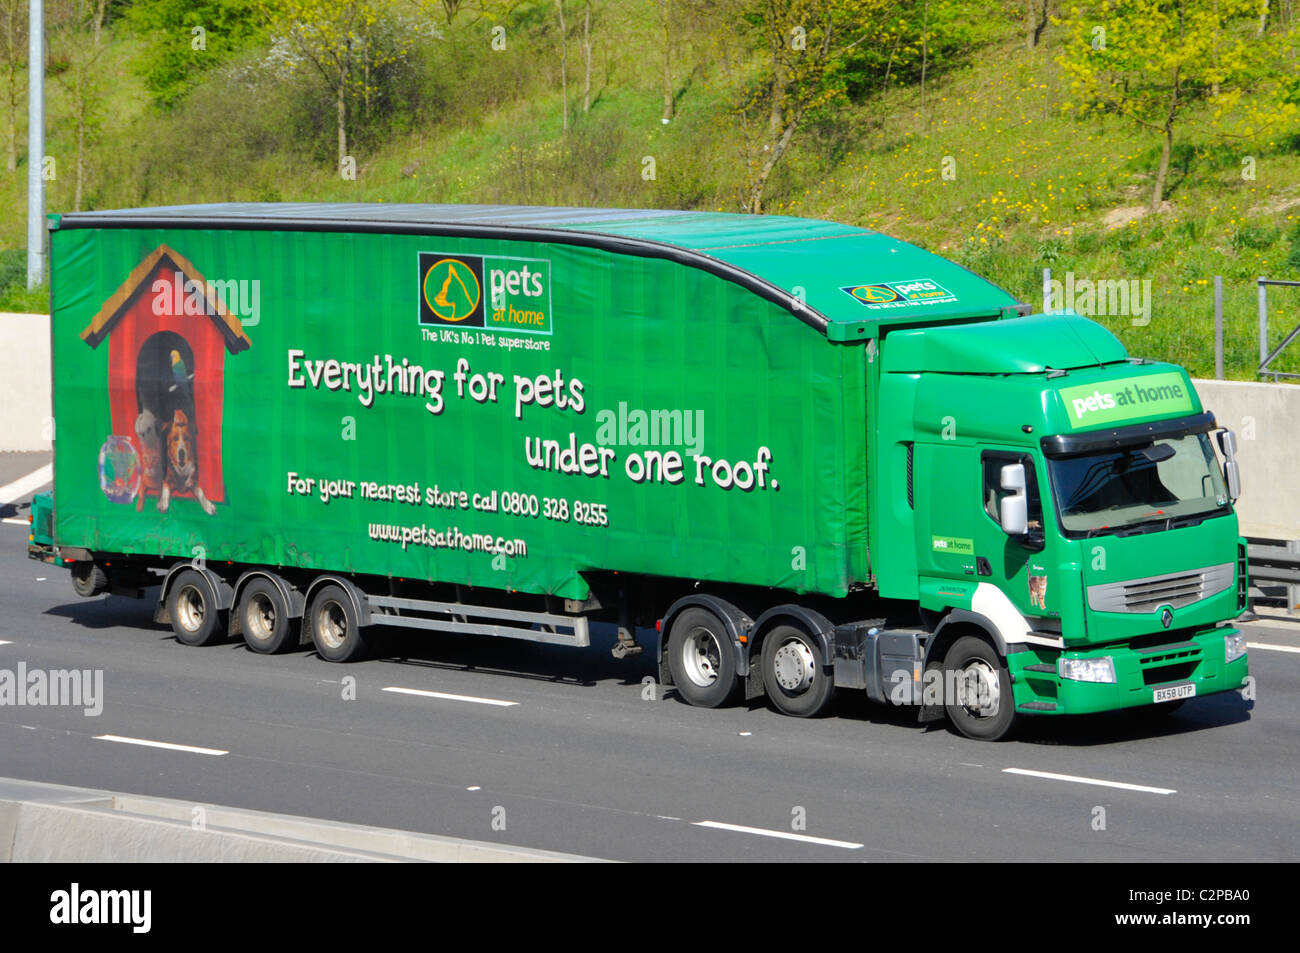 Aerodynamically shaped trailer and lorry delivering goods for Pets at Home Stock Photo